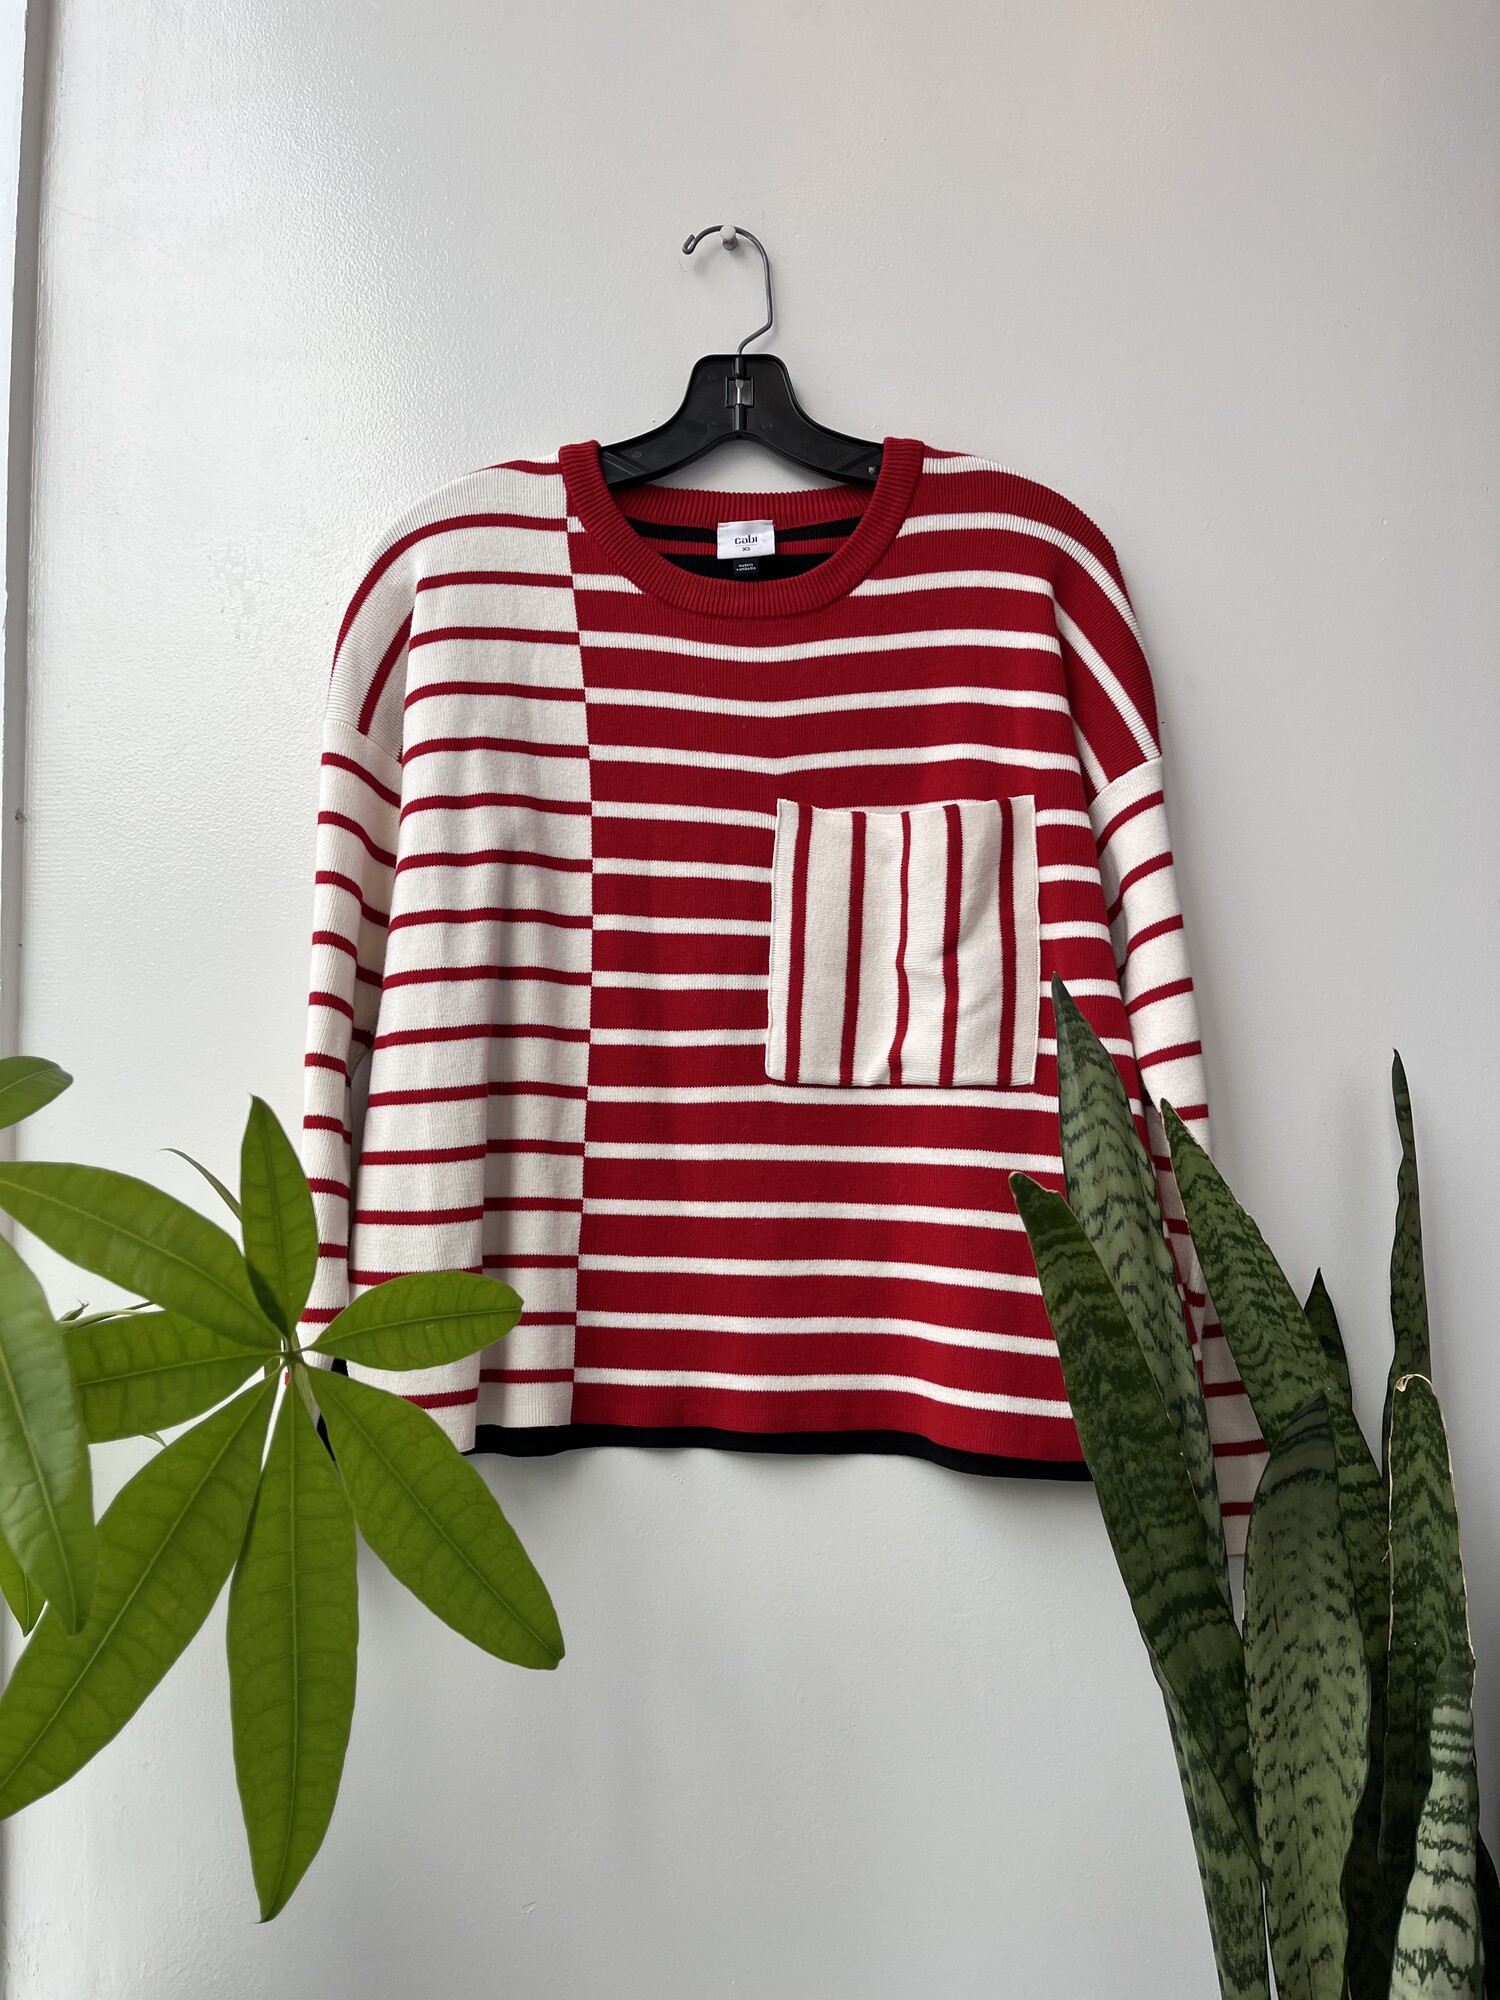 Cabi Mismatch Striped Knit Top W/Pocket, Red White and Black